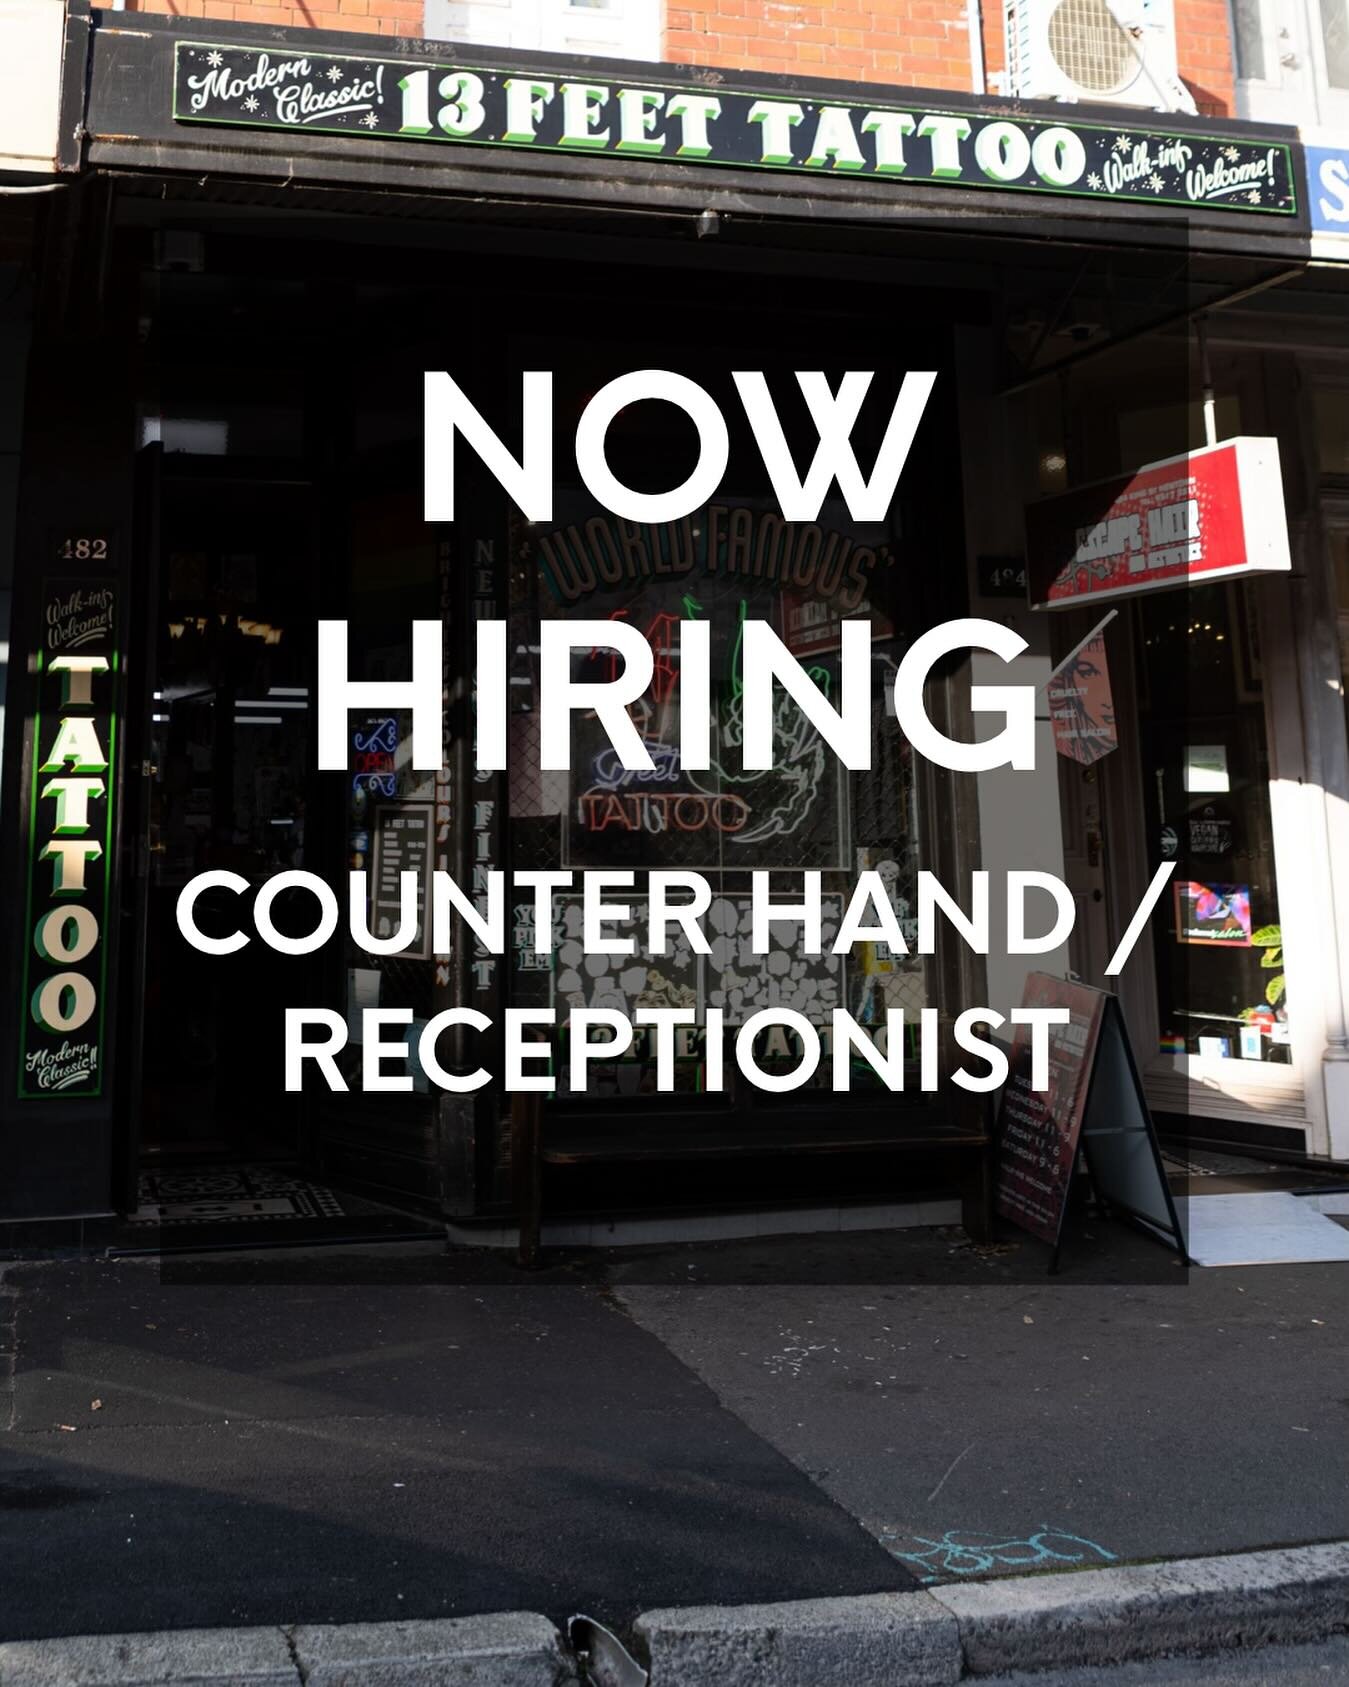 ‼️📣 POSITION AVAILABLE‼️📣

We are looking for a hard working and dedicated counter-hand/receptionist to join the @thirteenfeettattoo team in NEWTOWN. 
A passion for tattoos and the industry is an absolute must. Organised, detail oriented &amp; prio